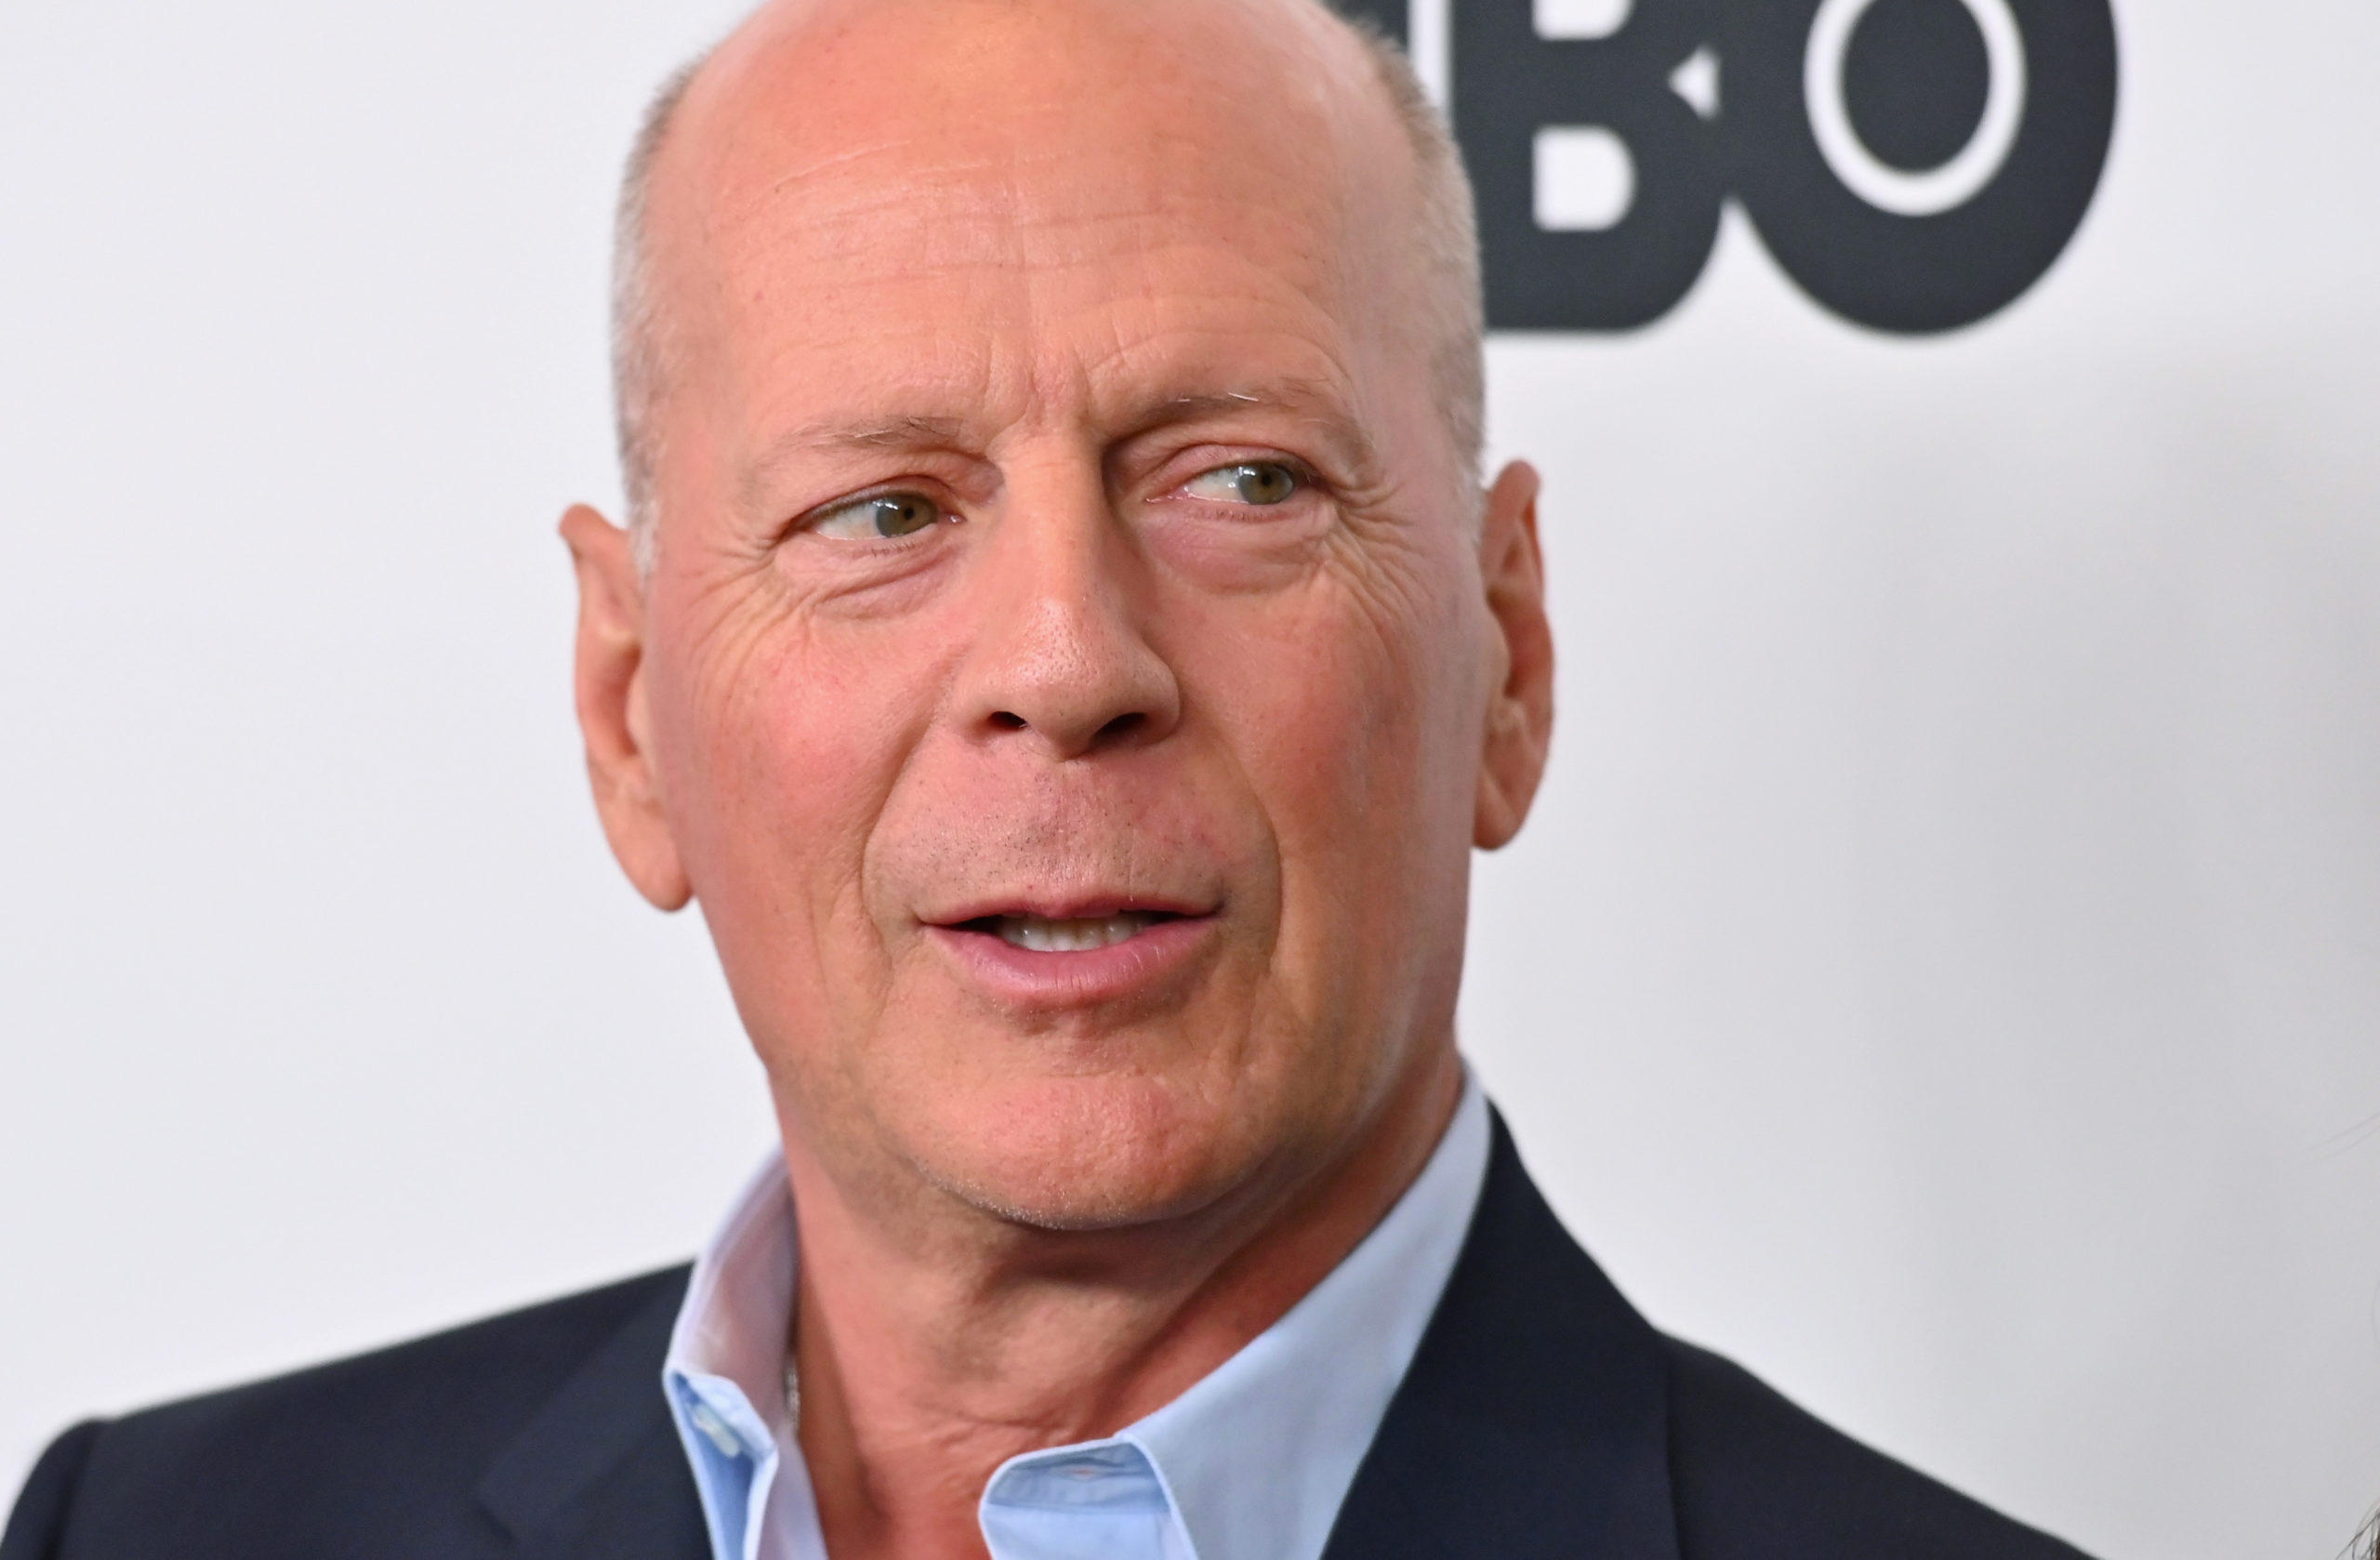 US actor Bruce Willis attends the premiere of "Motherless Brooklyn" during the 57th New York Film Festival at Alice Tully Hall on October 11, 2019 in New York City. (Photo by Angela Weiss / AFP) (Photo by ANGELA WEISS/AFP via Getty Images)